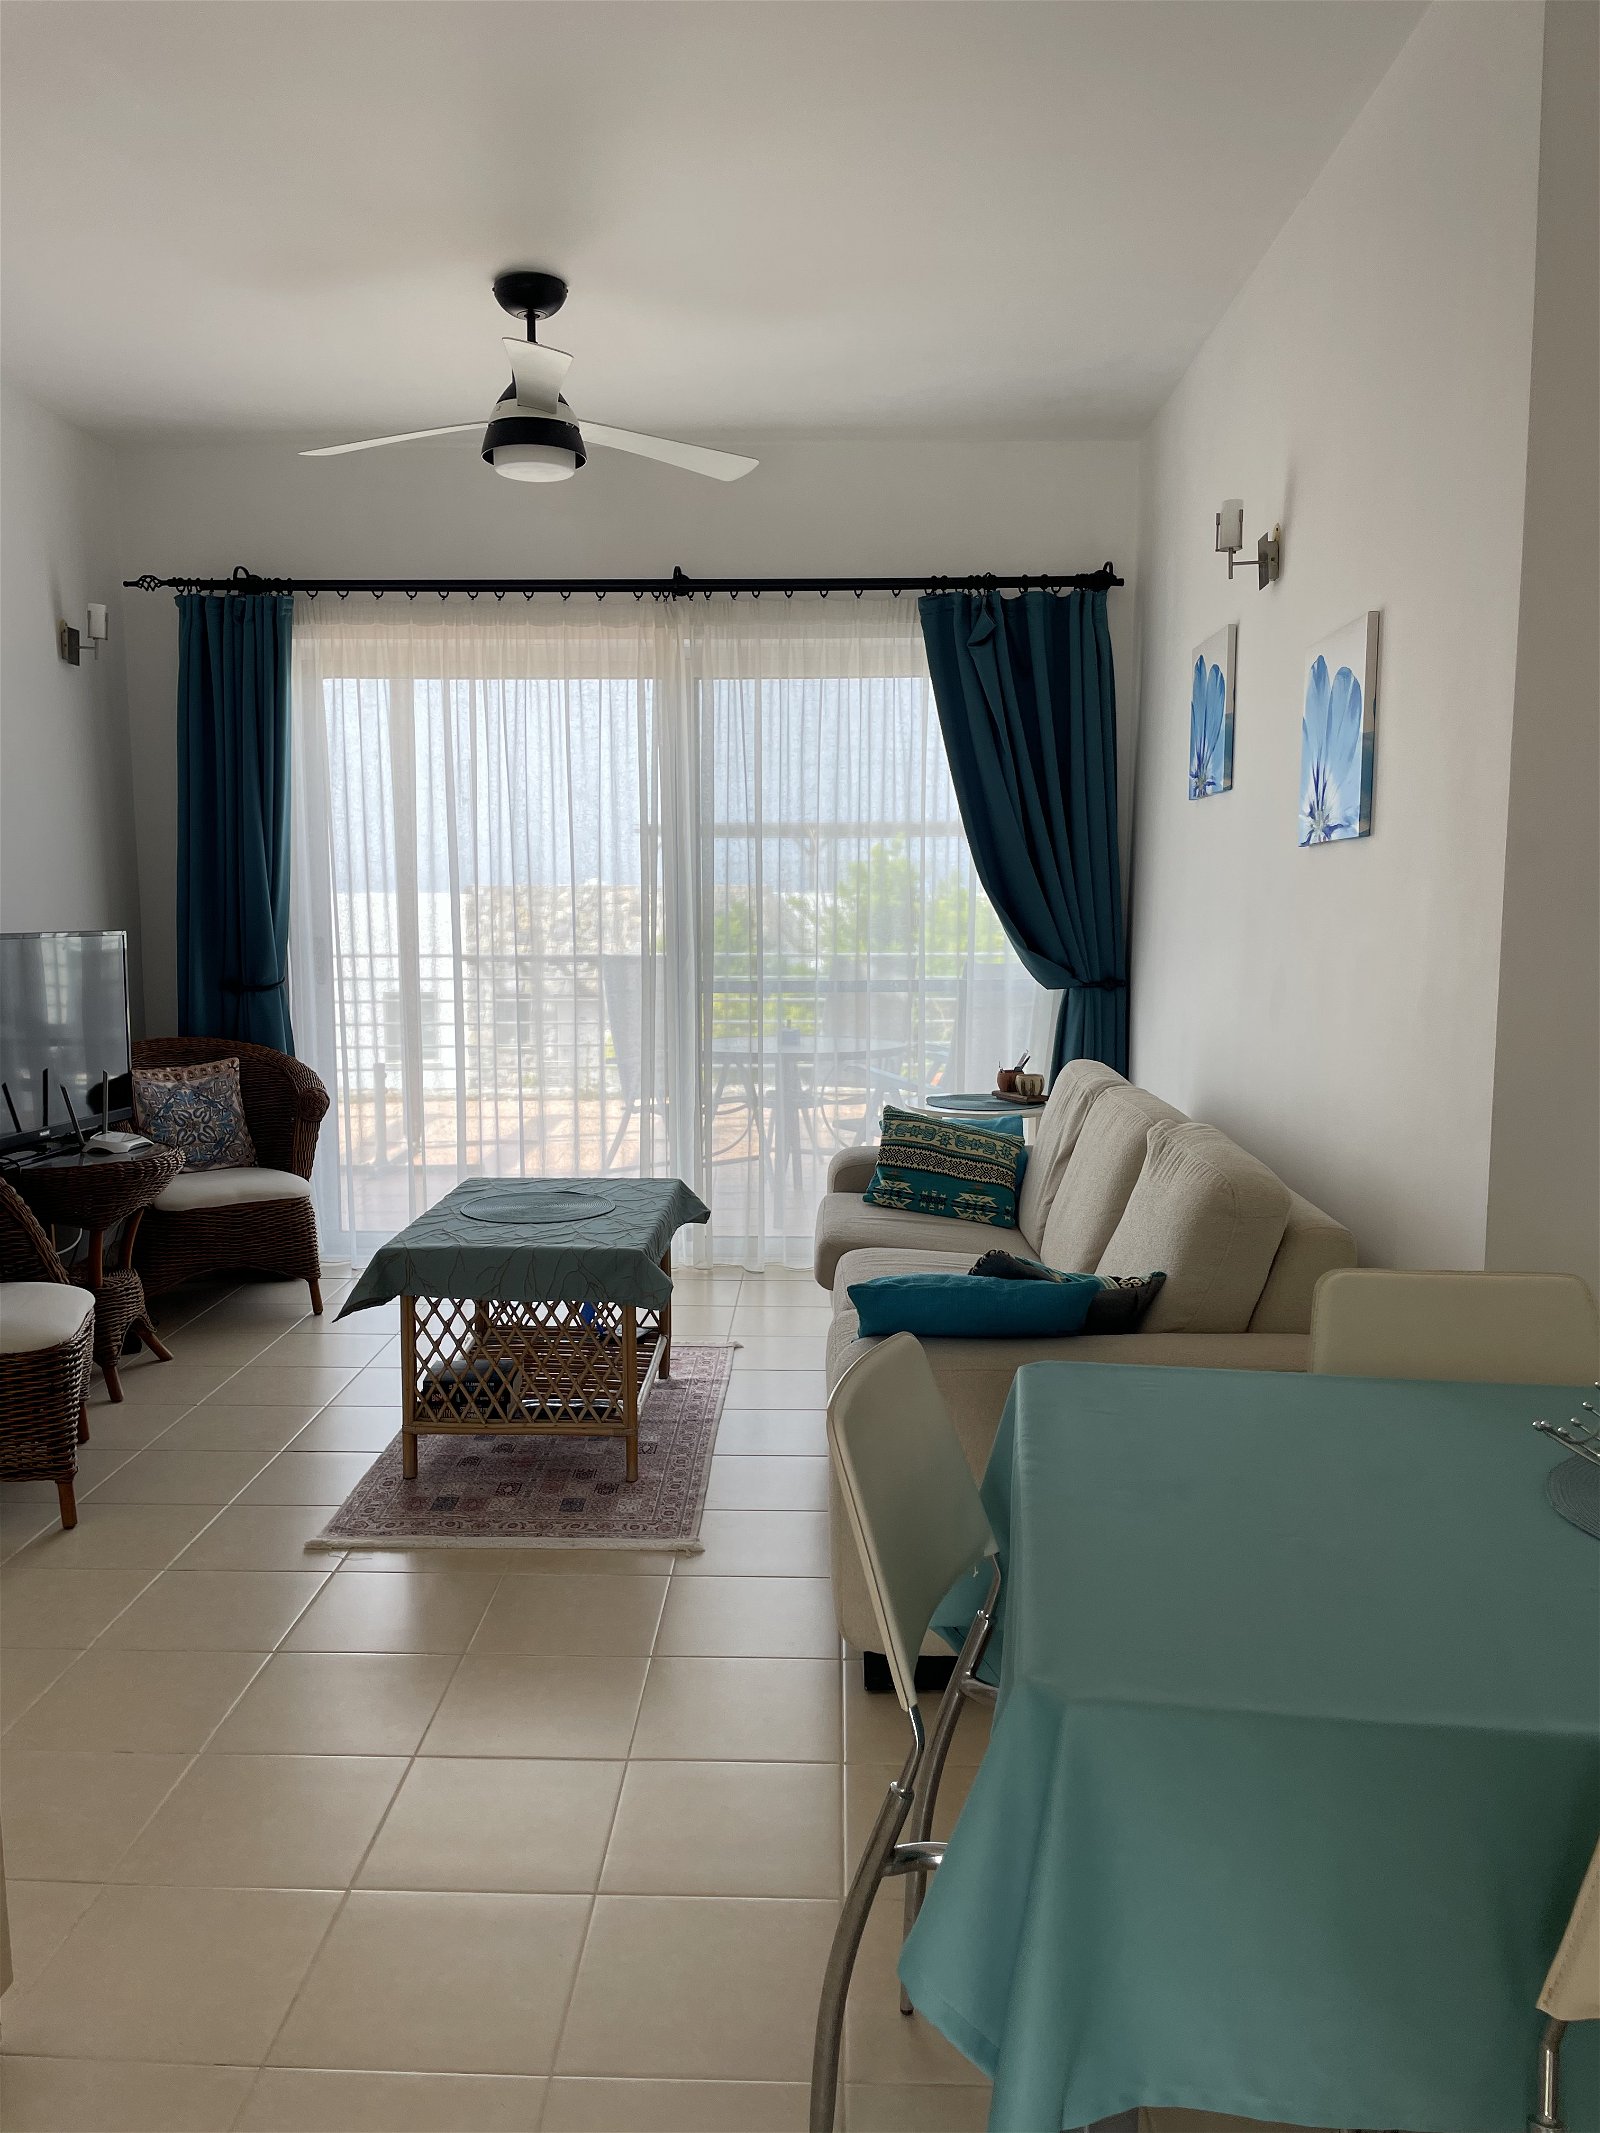 For Sale 2+1 Flat in Kyrenia Esentepe-d69d964d-265a-4845-af43-bbce57f6950f